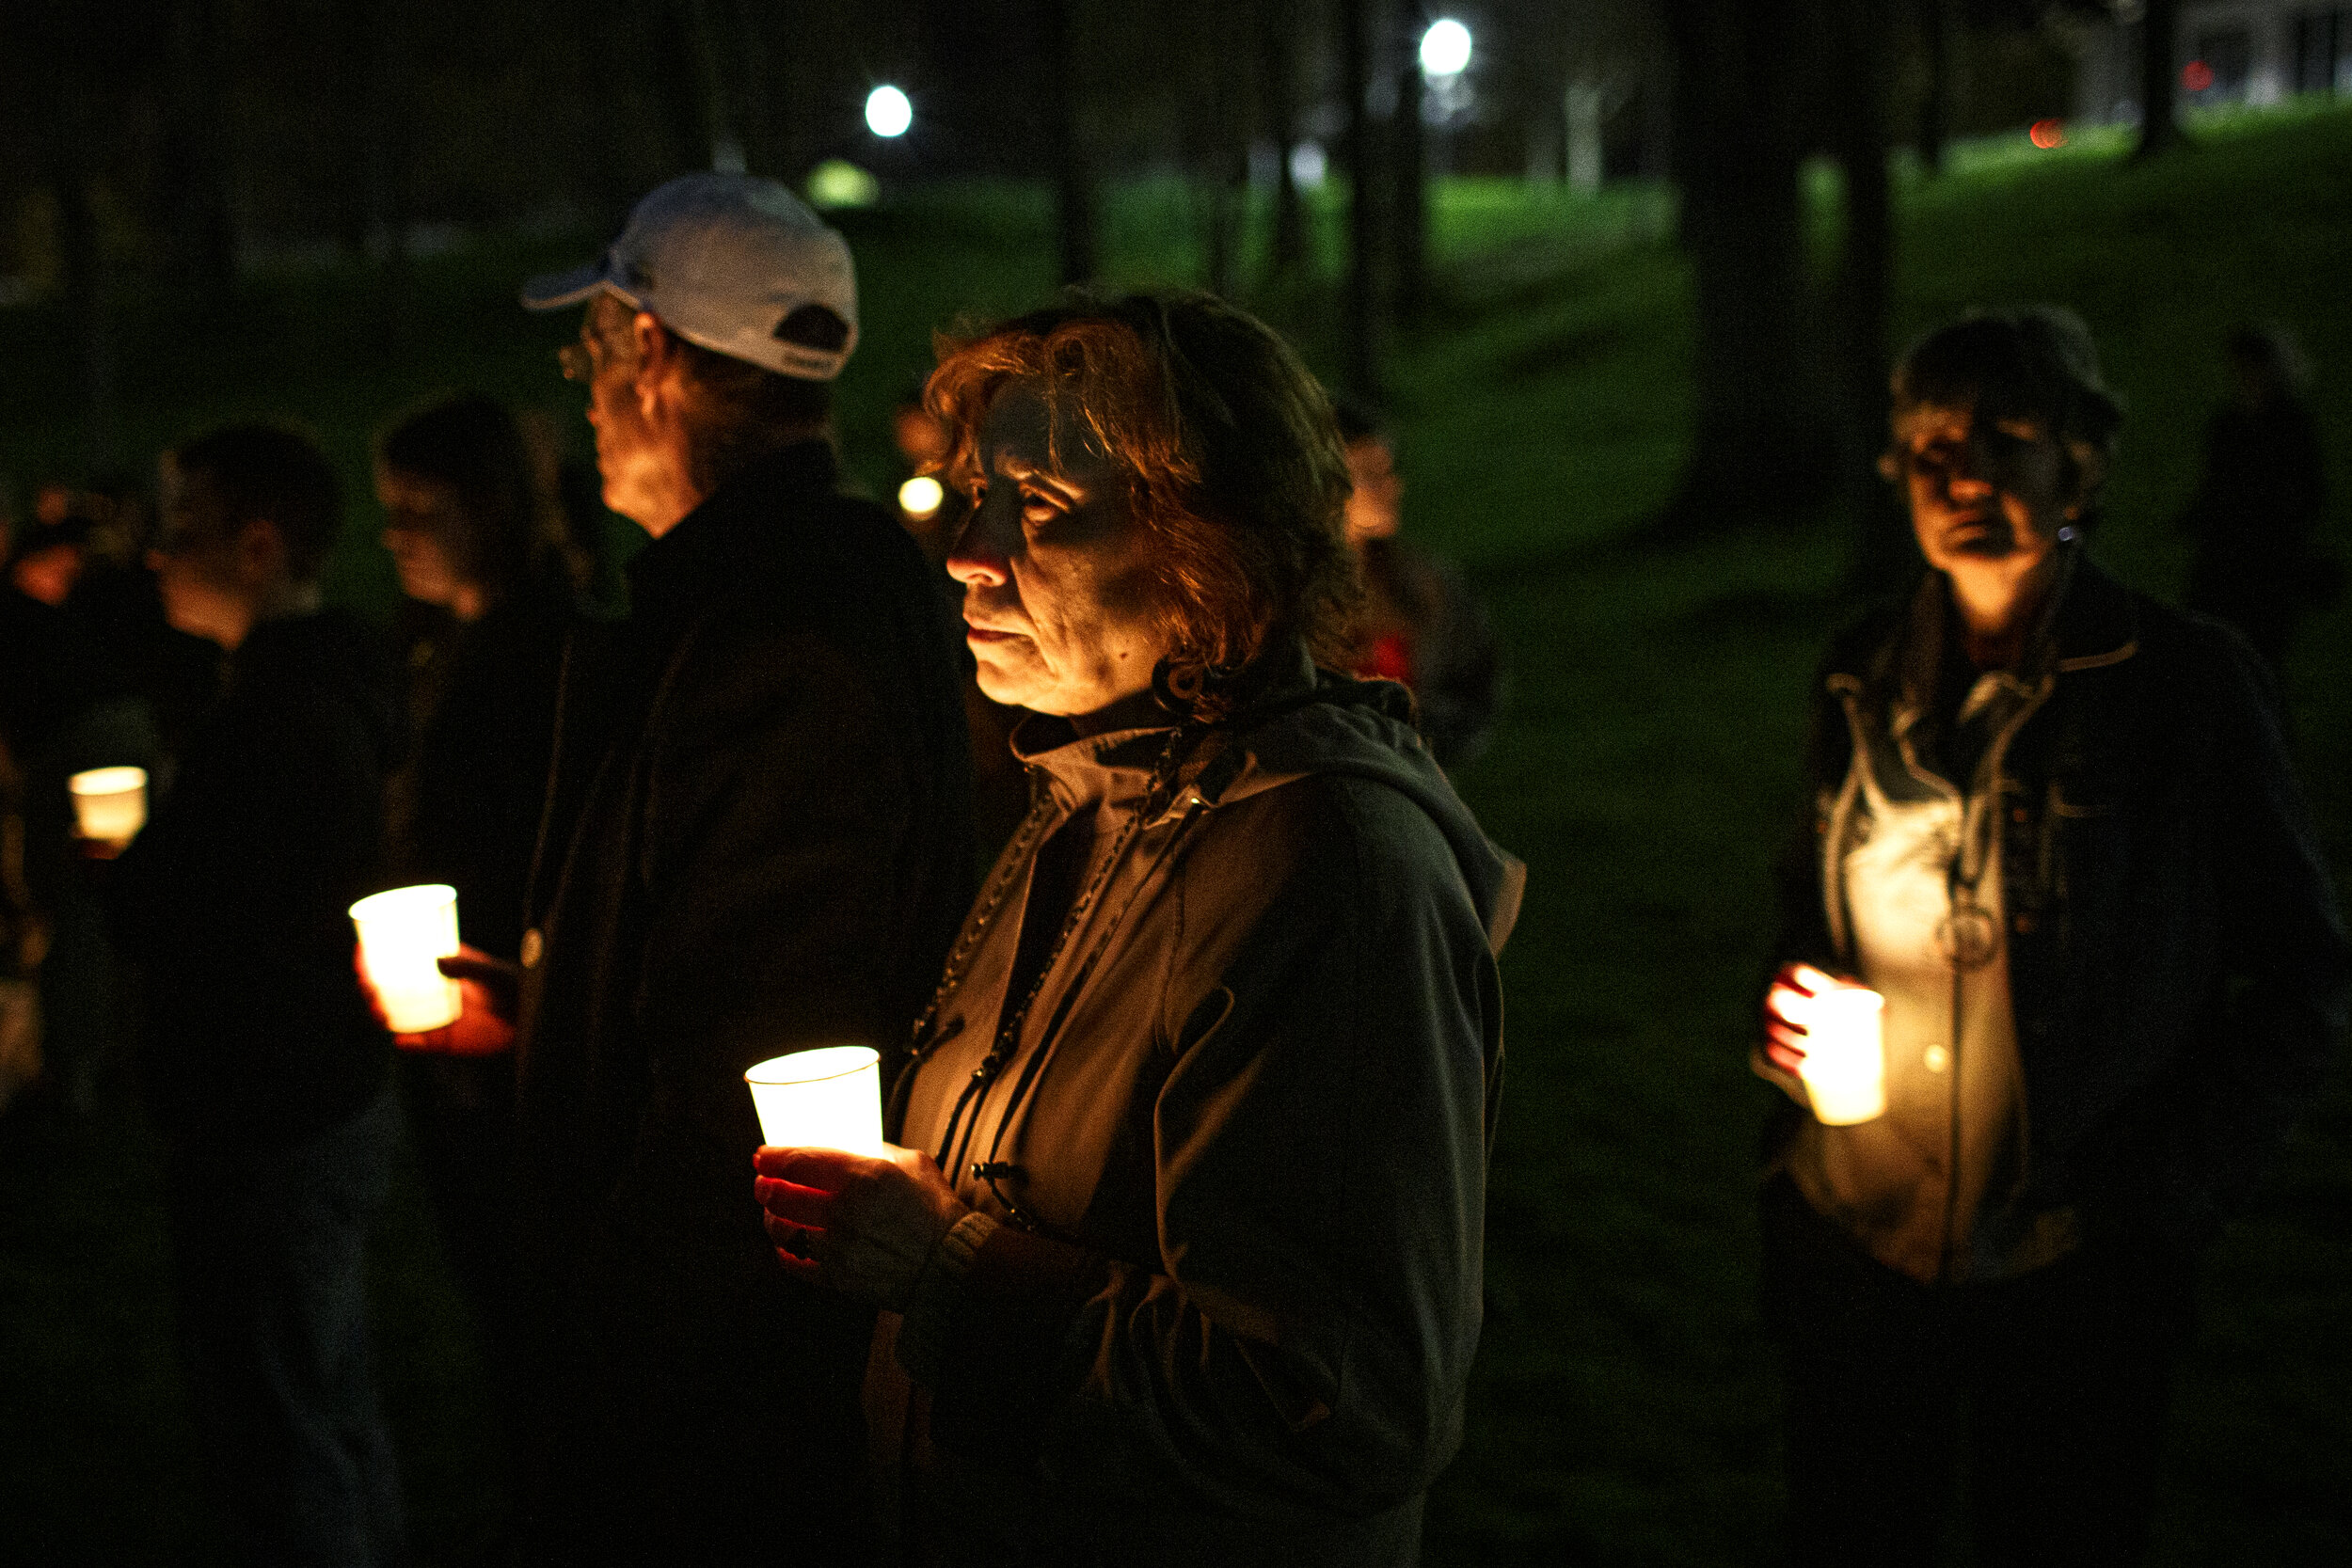  A large crowd gathers for the annual May 4th candle vigil in Kent, Ohio on May 3, 2016. They came together to honor those who were killed on this day, 46 years ago.  